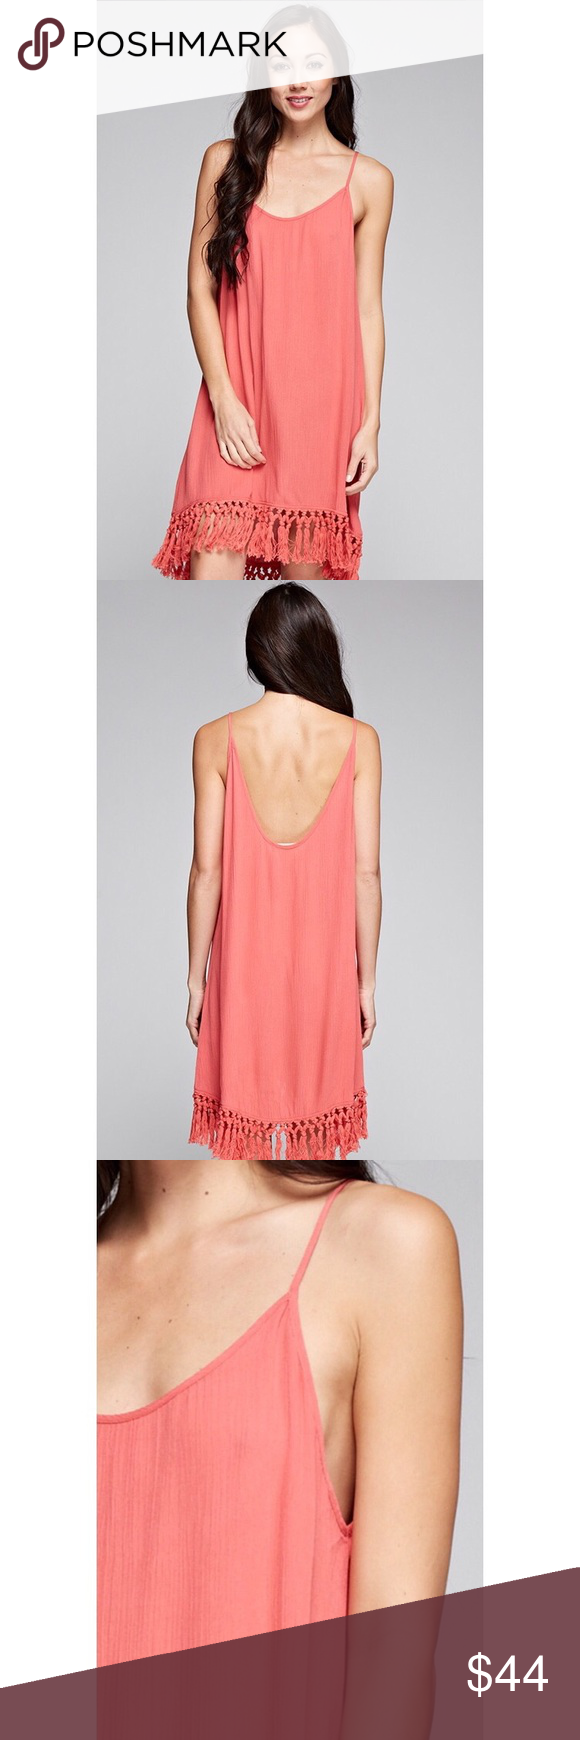 🆕 Best Of All Coral Fringe Dress The casually chic style of the Best of All C…